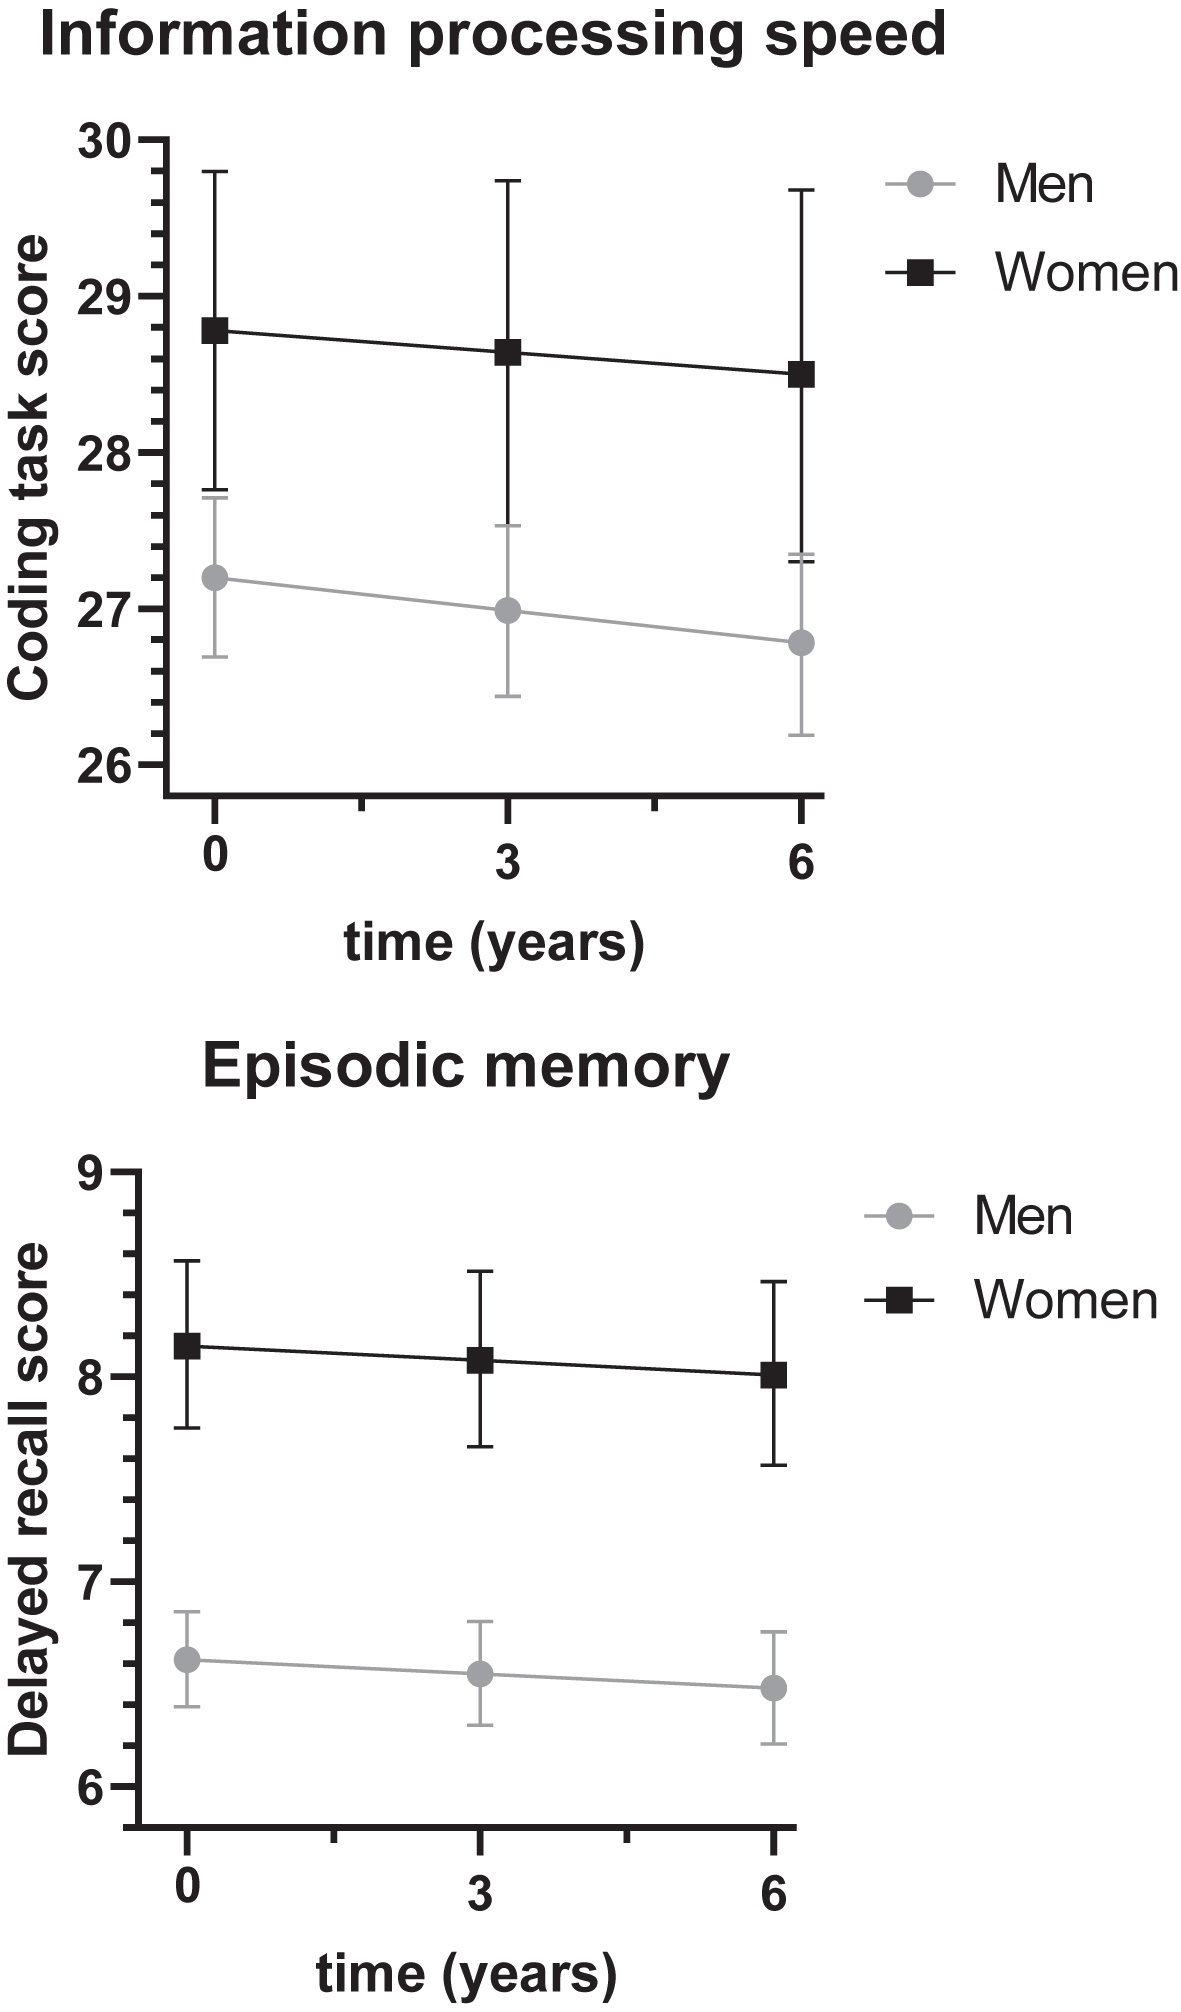 Sex differences in cognitive functioning over time. The sex difference in information processing speed was 1.58 (95% C.I.: 1.07–2.09, p < 0.01), the sex difference in episodic memory was 1.53 (95% C.I.: 1.36–1.71, p < 0.01). For models with blood pressure, total cholesterol, HDL cholesterol or LDL cholesterol, total effects of sex on information processing speed were 1.57 (95% C.I.: 1.06–2.07, p < 0.01), 1.32 (95% C.I.: 0.67–1.97, p < 0.01), 0.67 (95% C.I.: –0.19–1.53, p = 0.13) and 0.66 (95% C.I.: –0.19–1.53, p = 0.13), respectively, and the total effects of sex on episodic memory were 1.53 (95% C.I.: 1.35–1.70, p < 0.01), 1.45 (95% C.I.: 1.22–1.67, p < 0.01), 1.55 (95% C.I.: 1.24–1.85, p < 0.01), and 1.55 (95% C.I.: 1.24–1.85, p < 0.01), respectively.